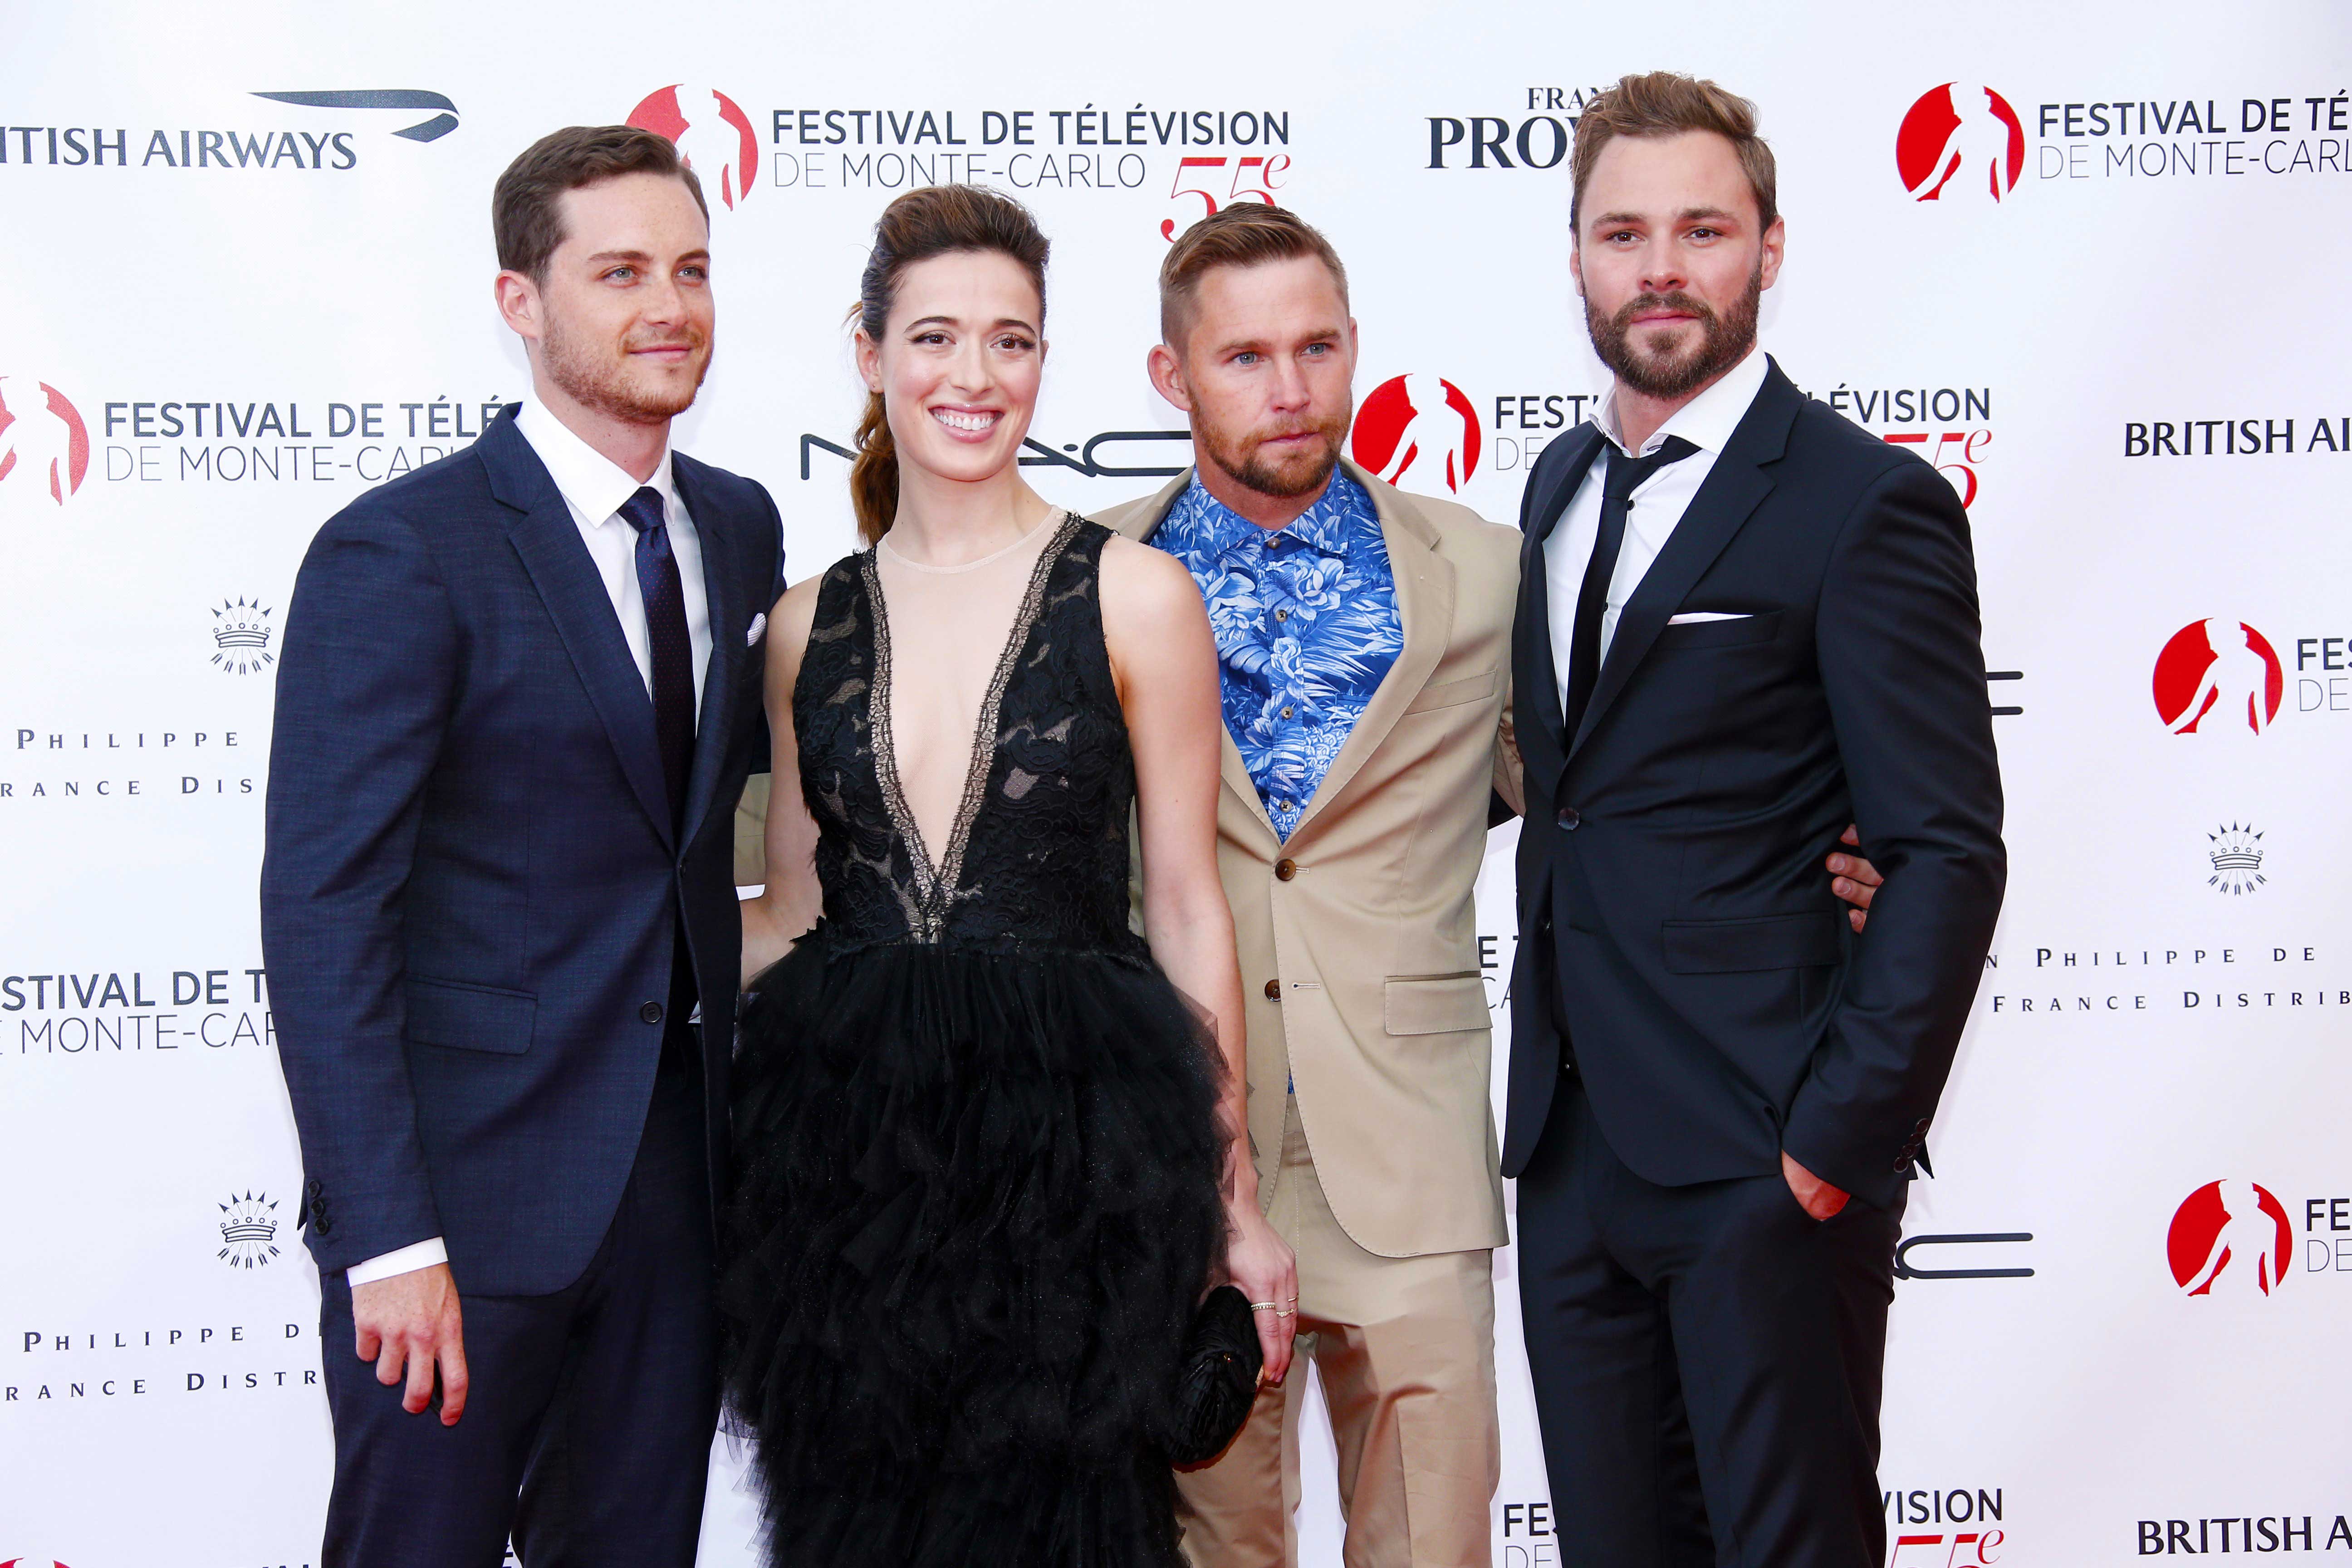 Jesse Lee Soffer, Marina Squerciati, Brian Geraghty and Patrick Flueger posing at an event.